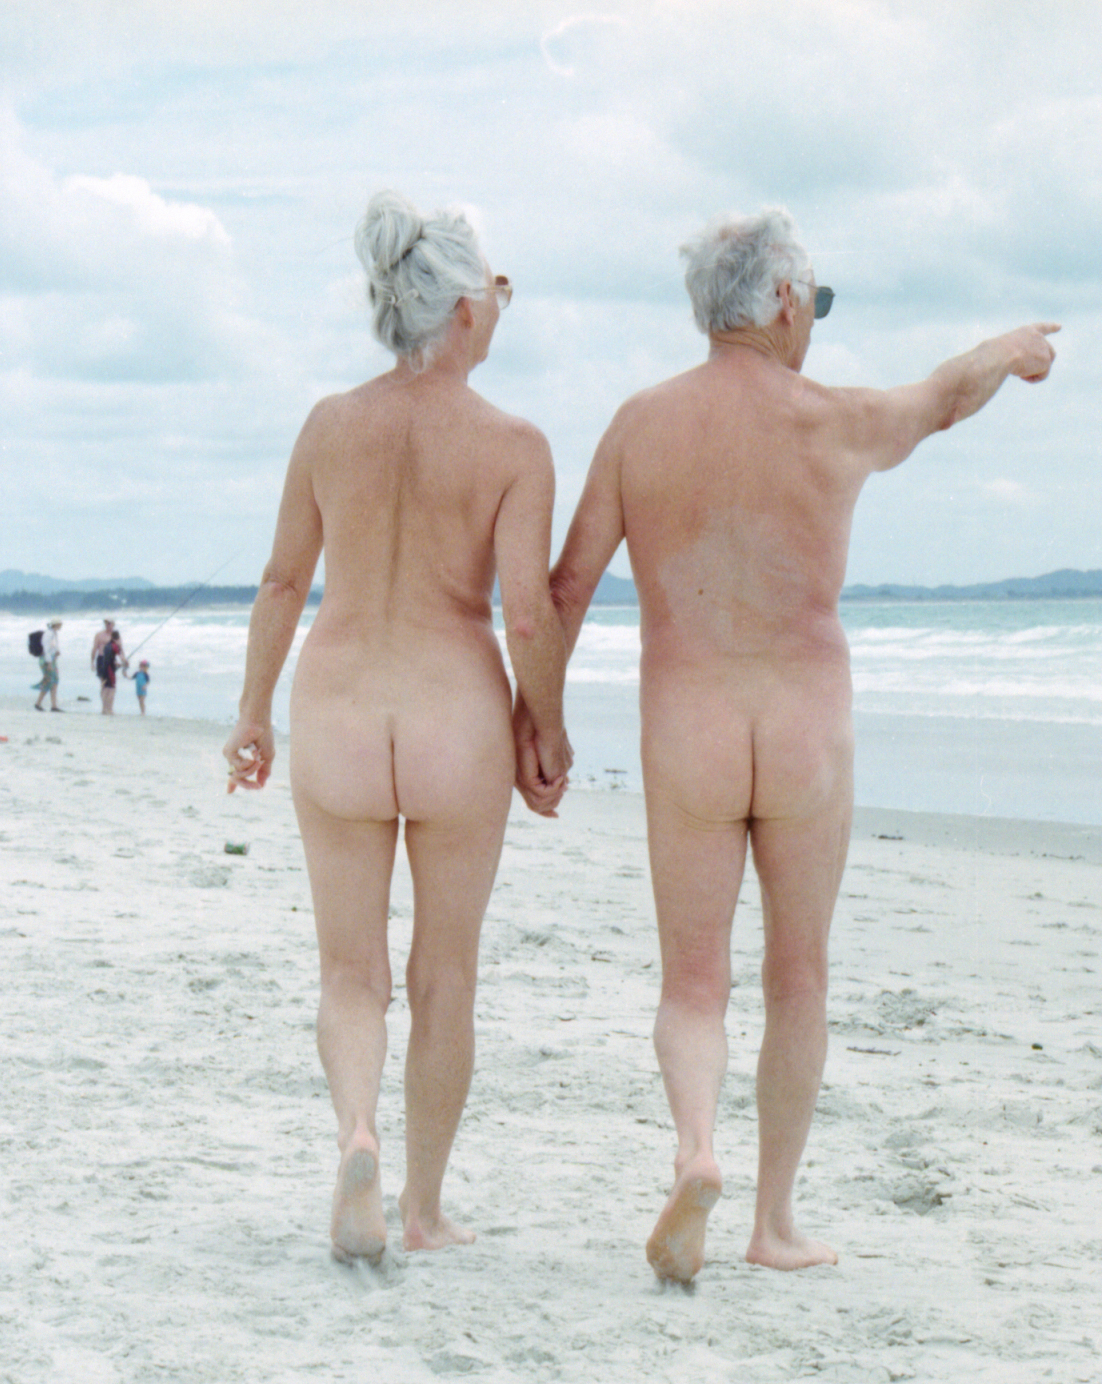 1102px x 1384px - Topless sunbathing on New Zealand beaches: The law and what we really think  - NZ Herald